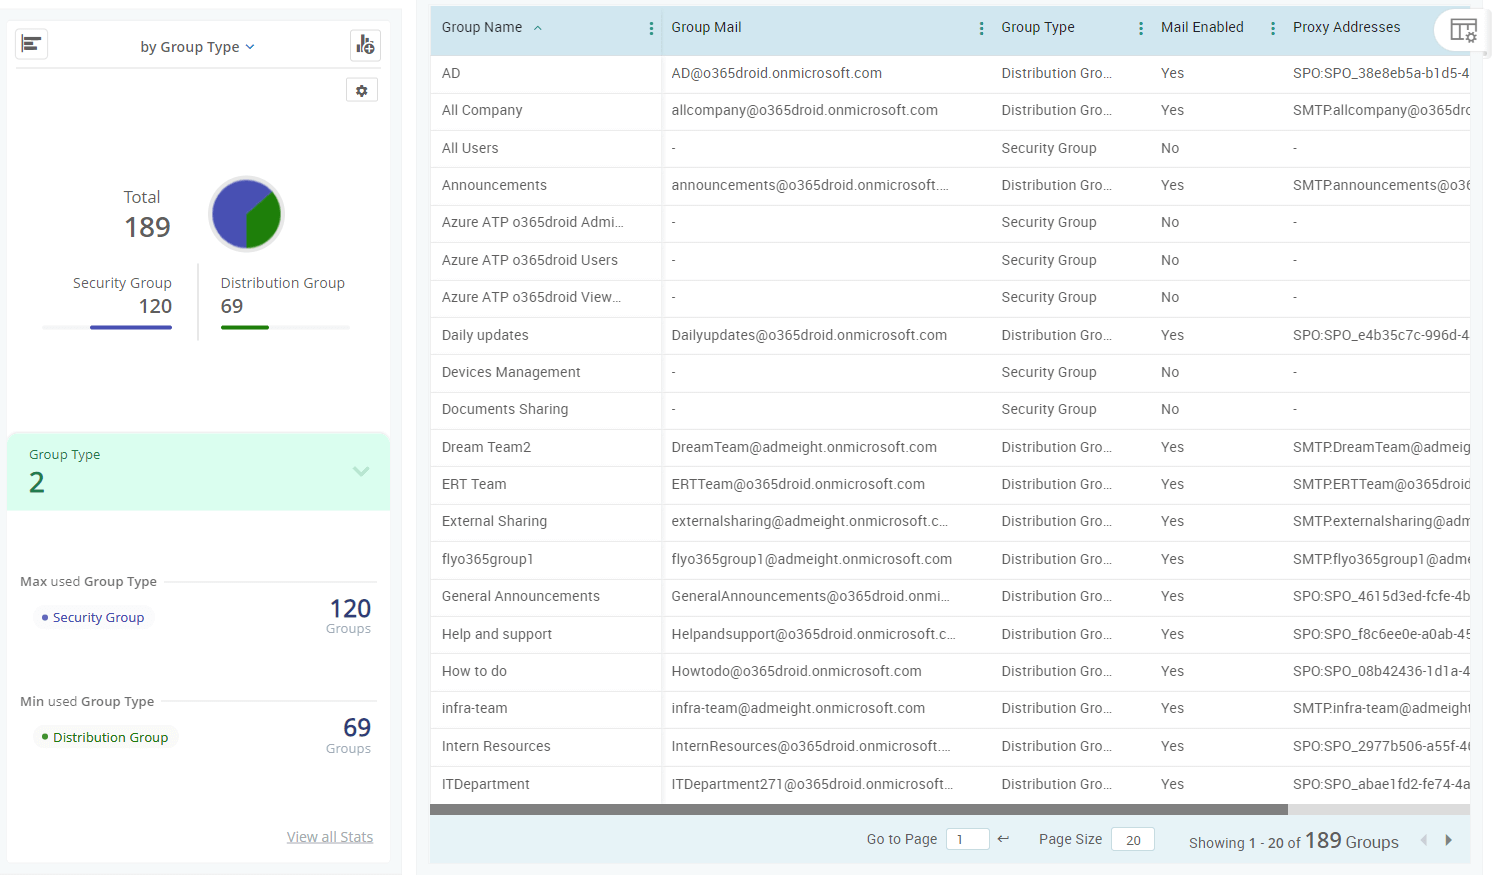 https://admindroid.com/images/feature-template-images/feature-reports-screenshots/azure-group-reports/all-groups.png